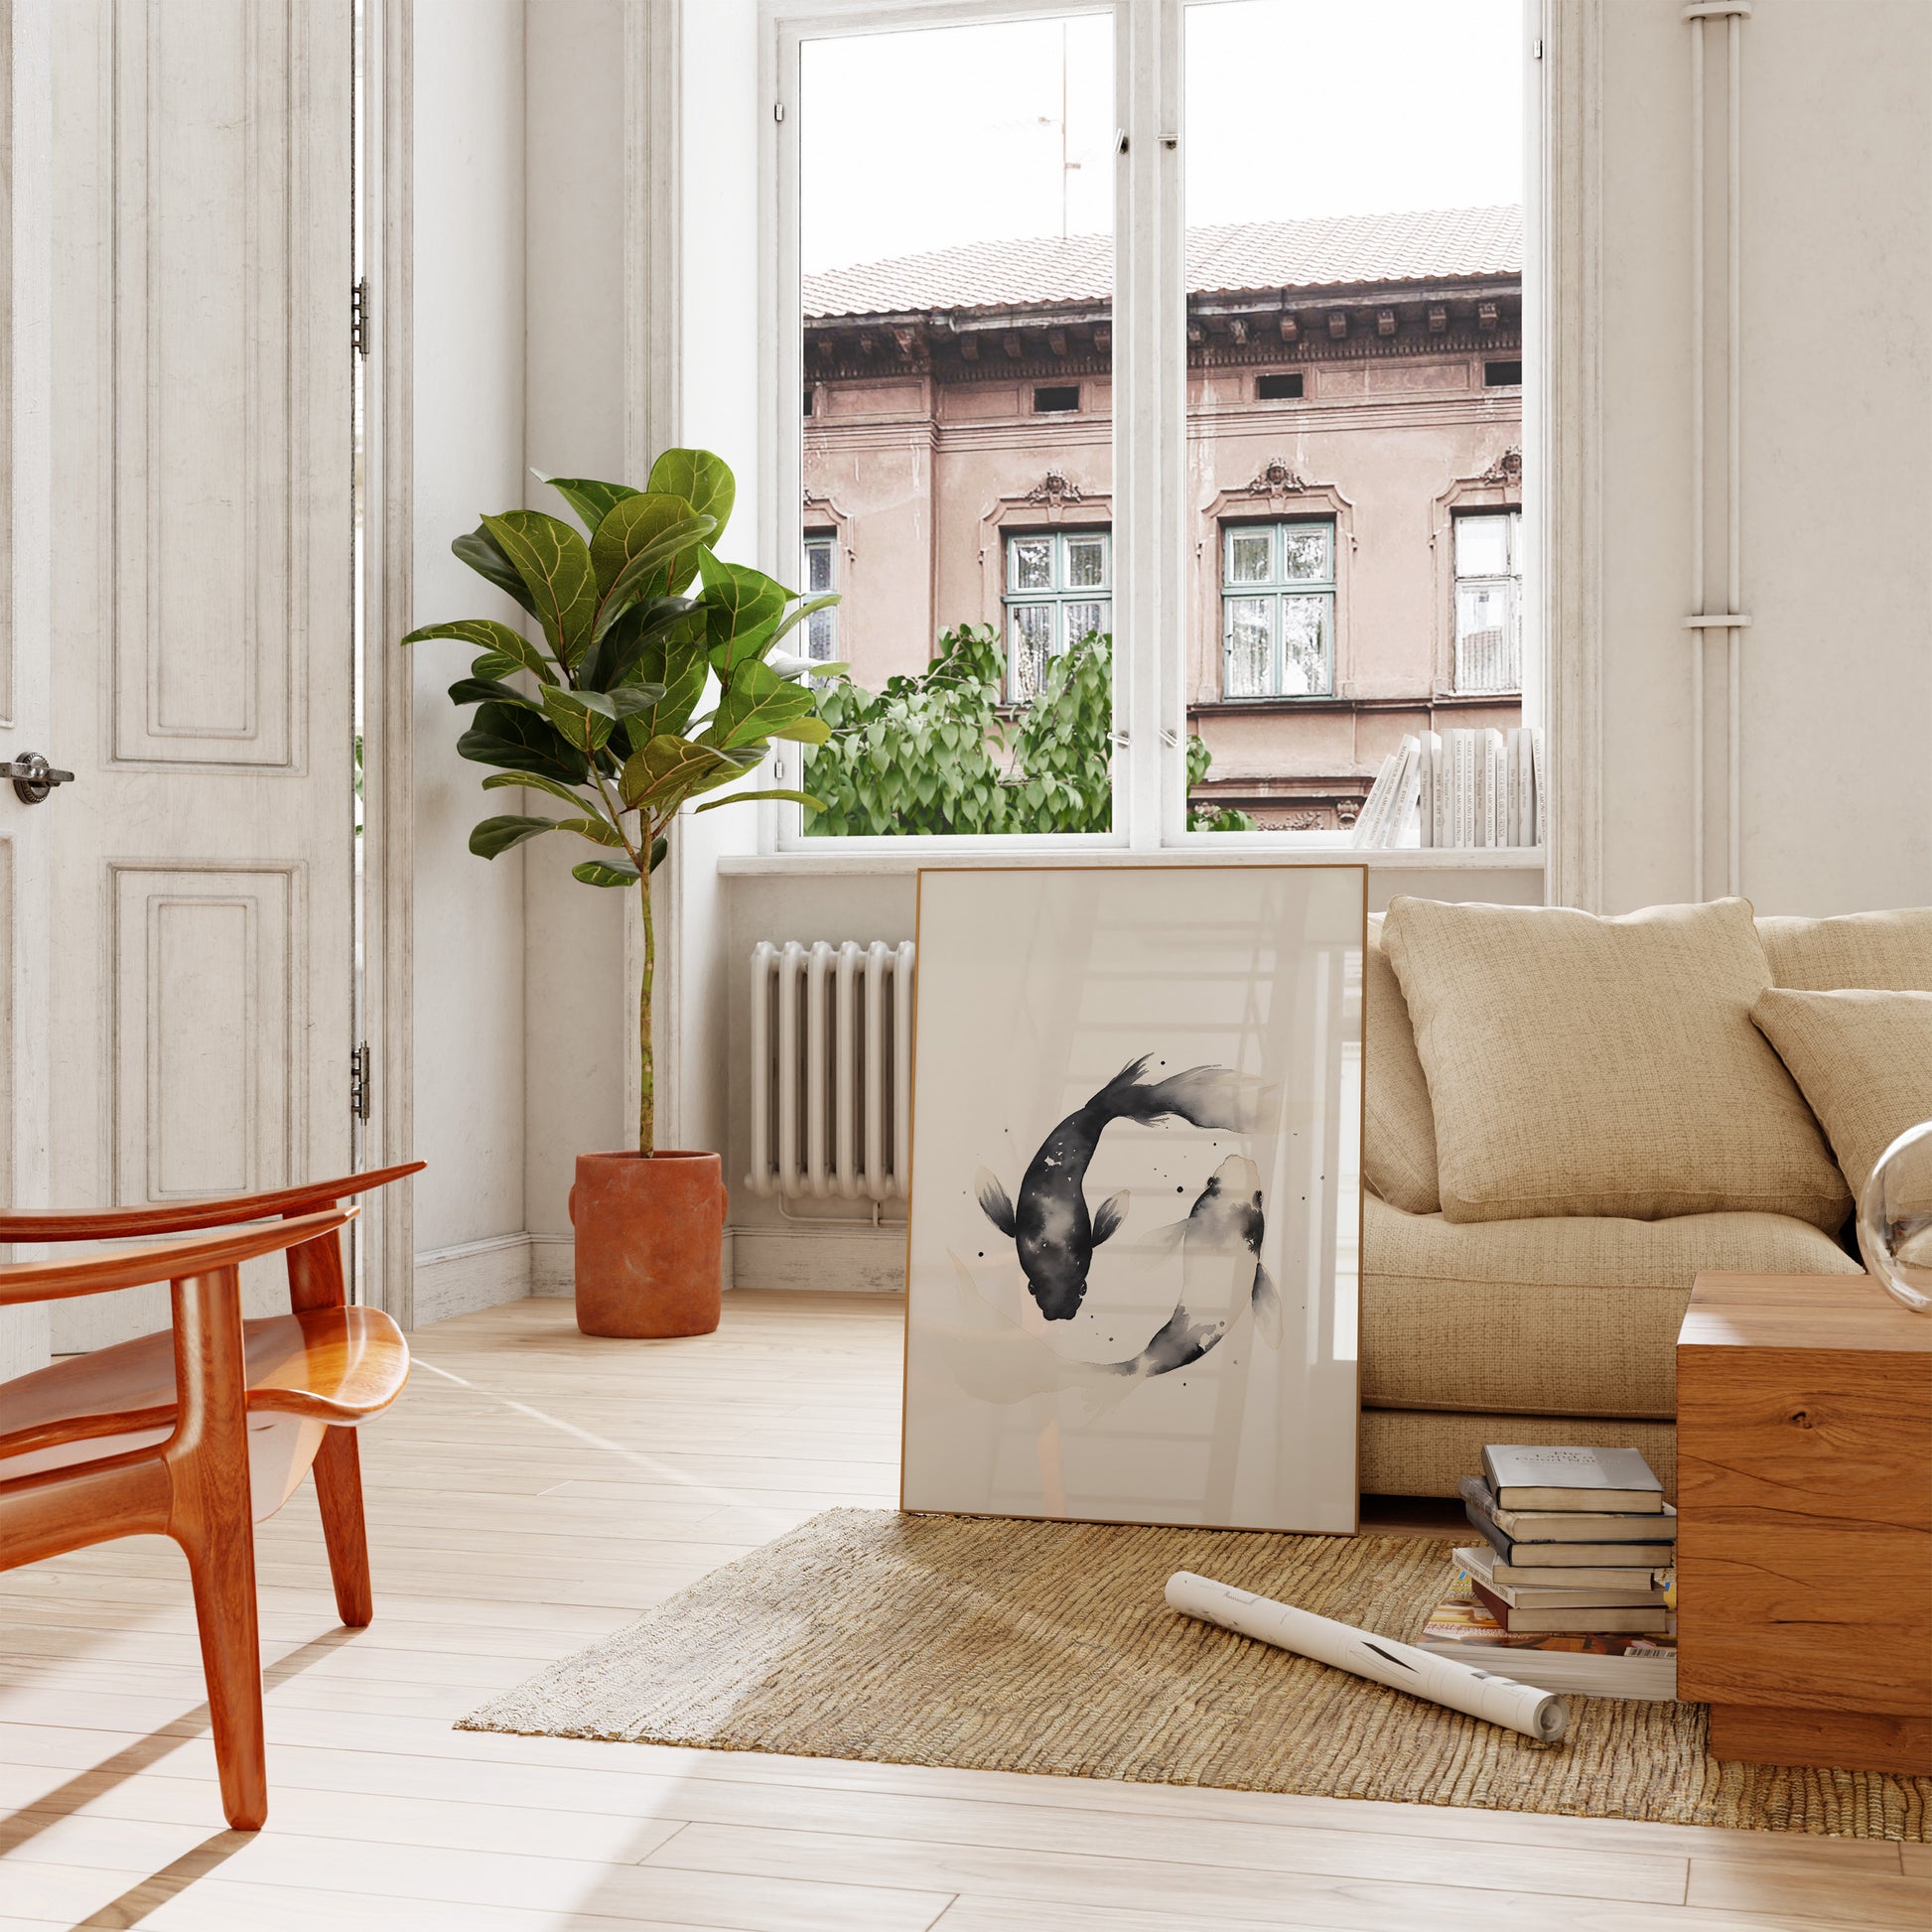 Bright apartment room with a cozy sofa, plants, and art.